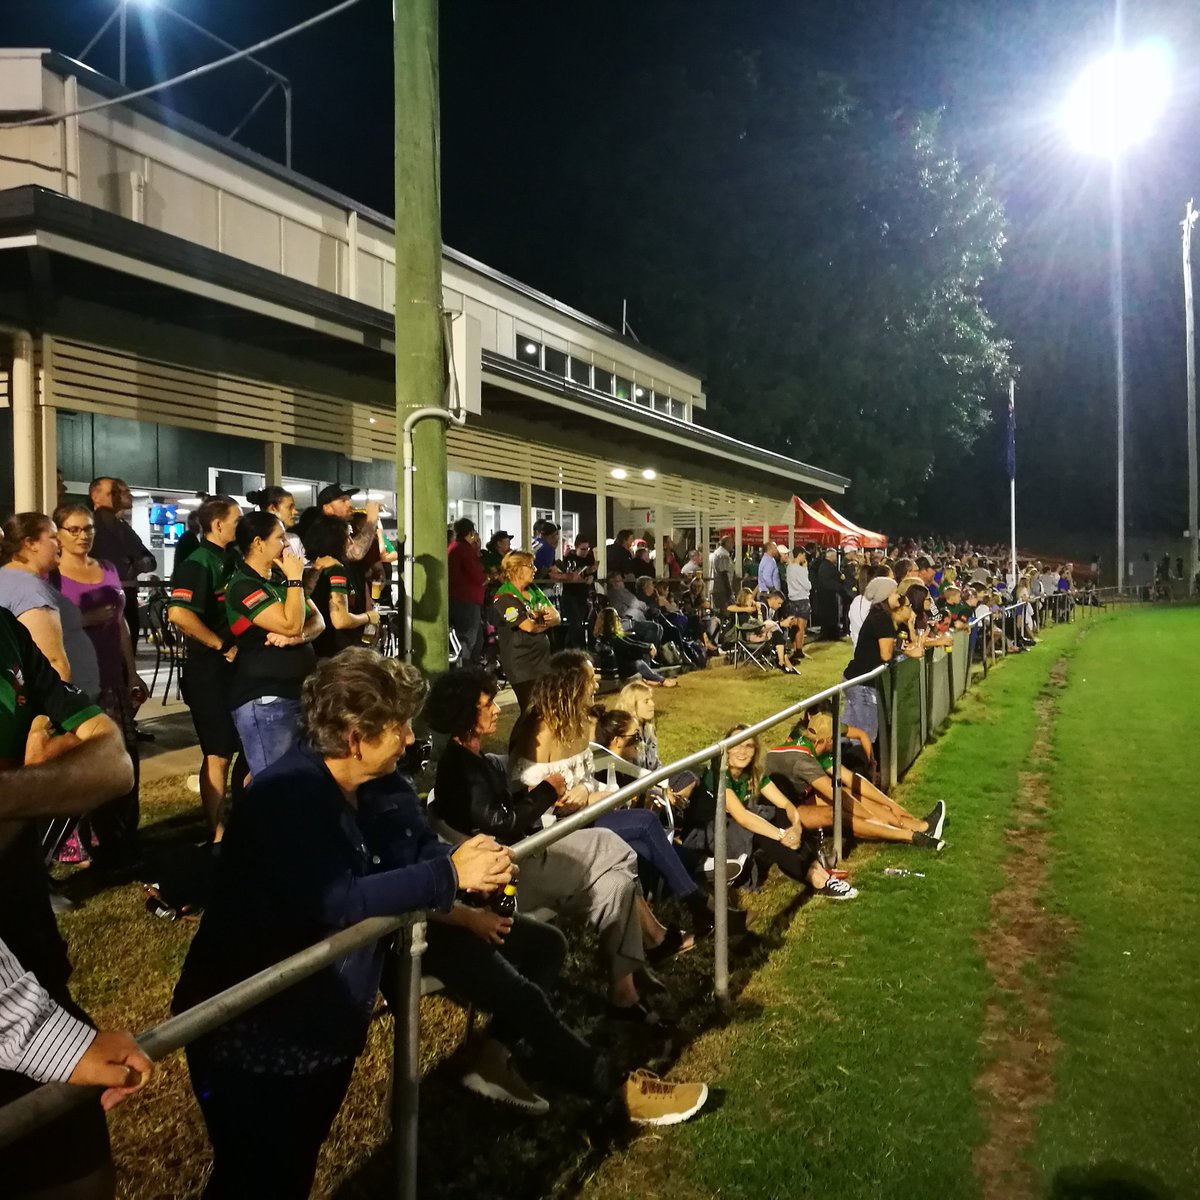 #ANZACEve footy under lights, local rivalry, massive crowd, close contest #getaroundit #AFLQfooty